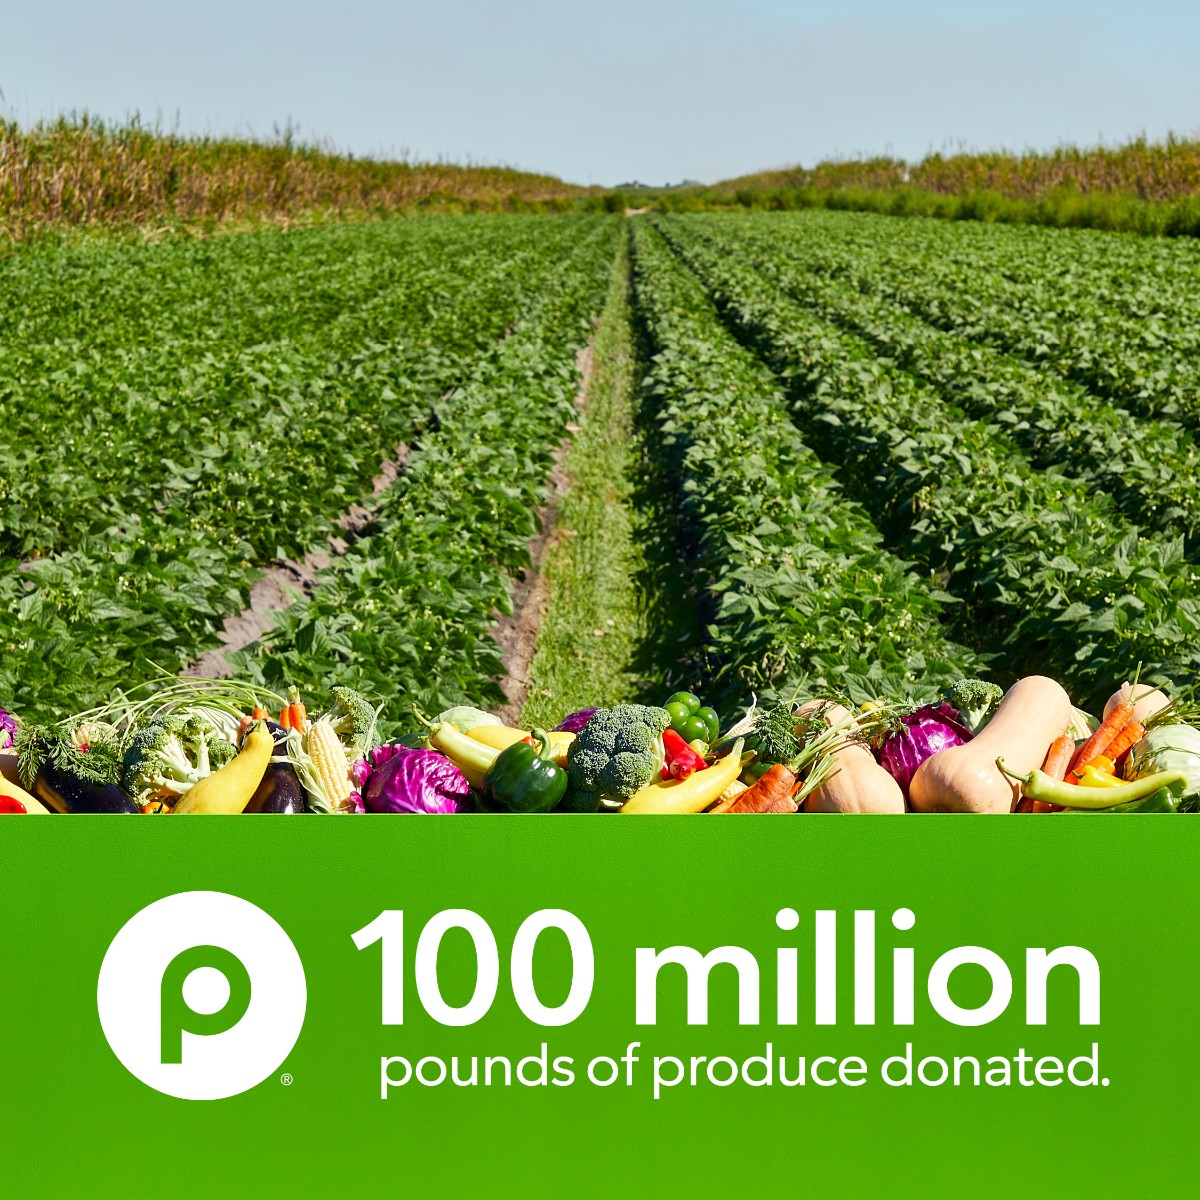 In 2020, @Publix started a program to purchase fresh produce from struggling farmers & donate it to those facing hunger. Today, Publix has reached 100M pounds of produce donated to @FeedingAmerica food banks with 7.9M pounds going to FTB. Thank you for supporting our community!